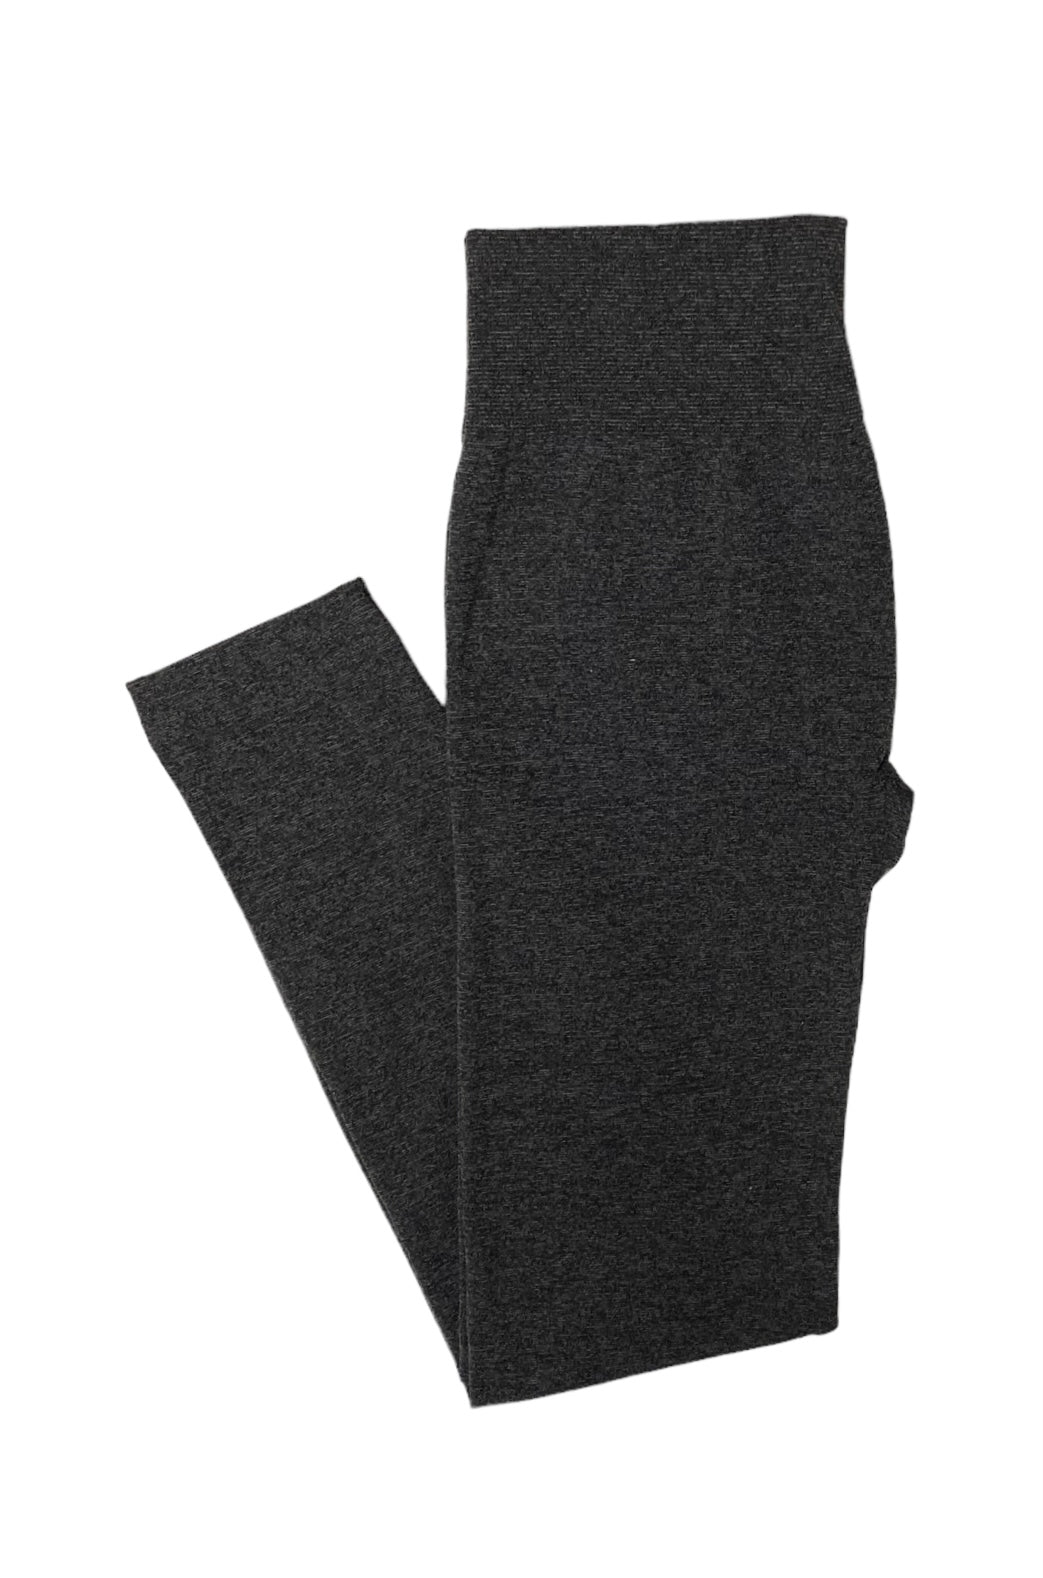 Black and Grey Leggings - S – Deals by Smart Sales Co.